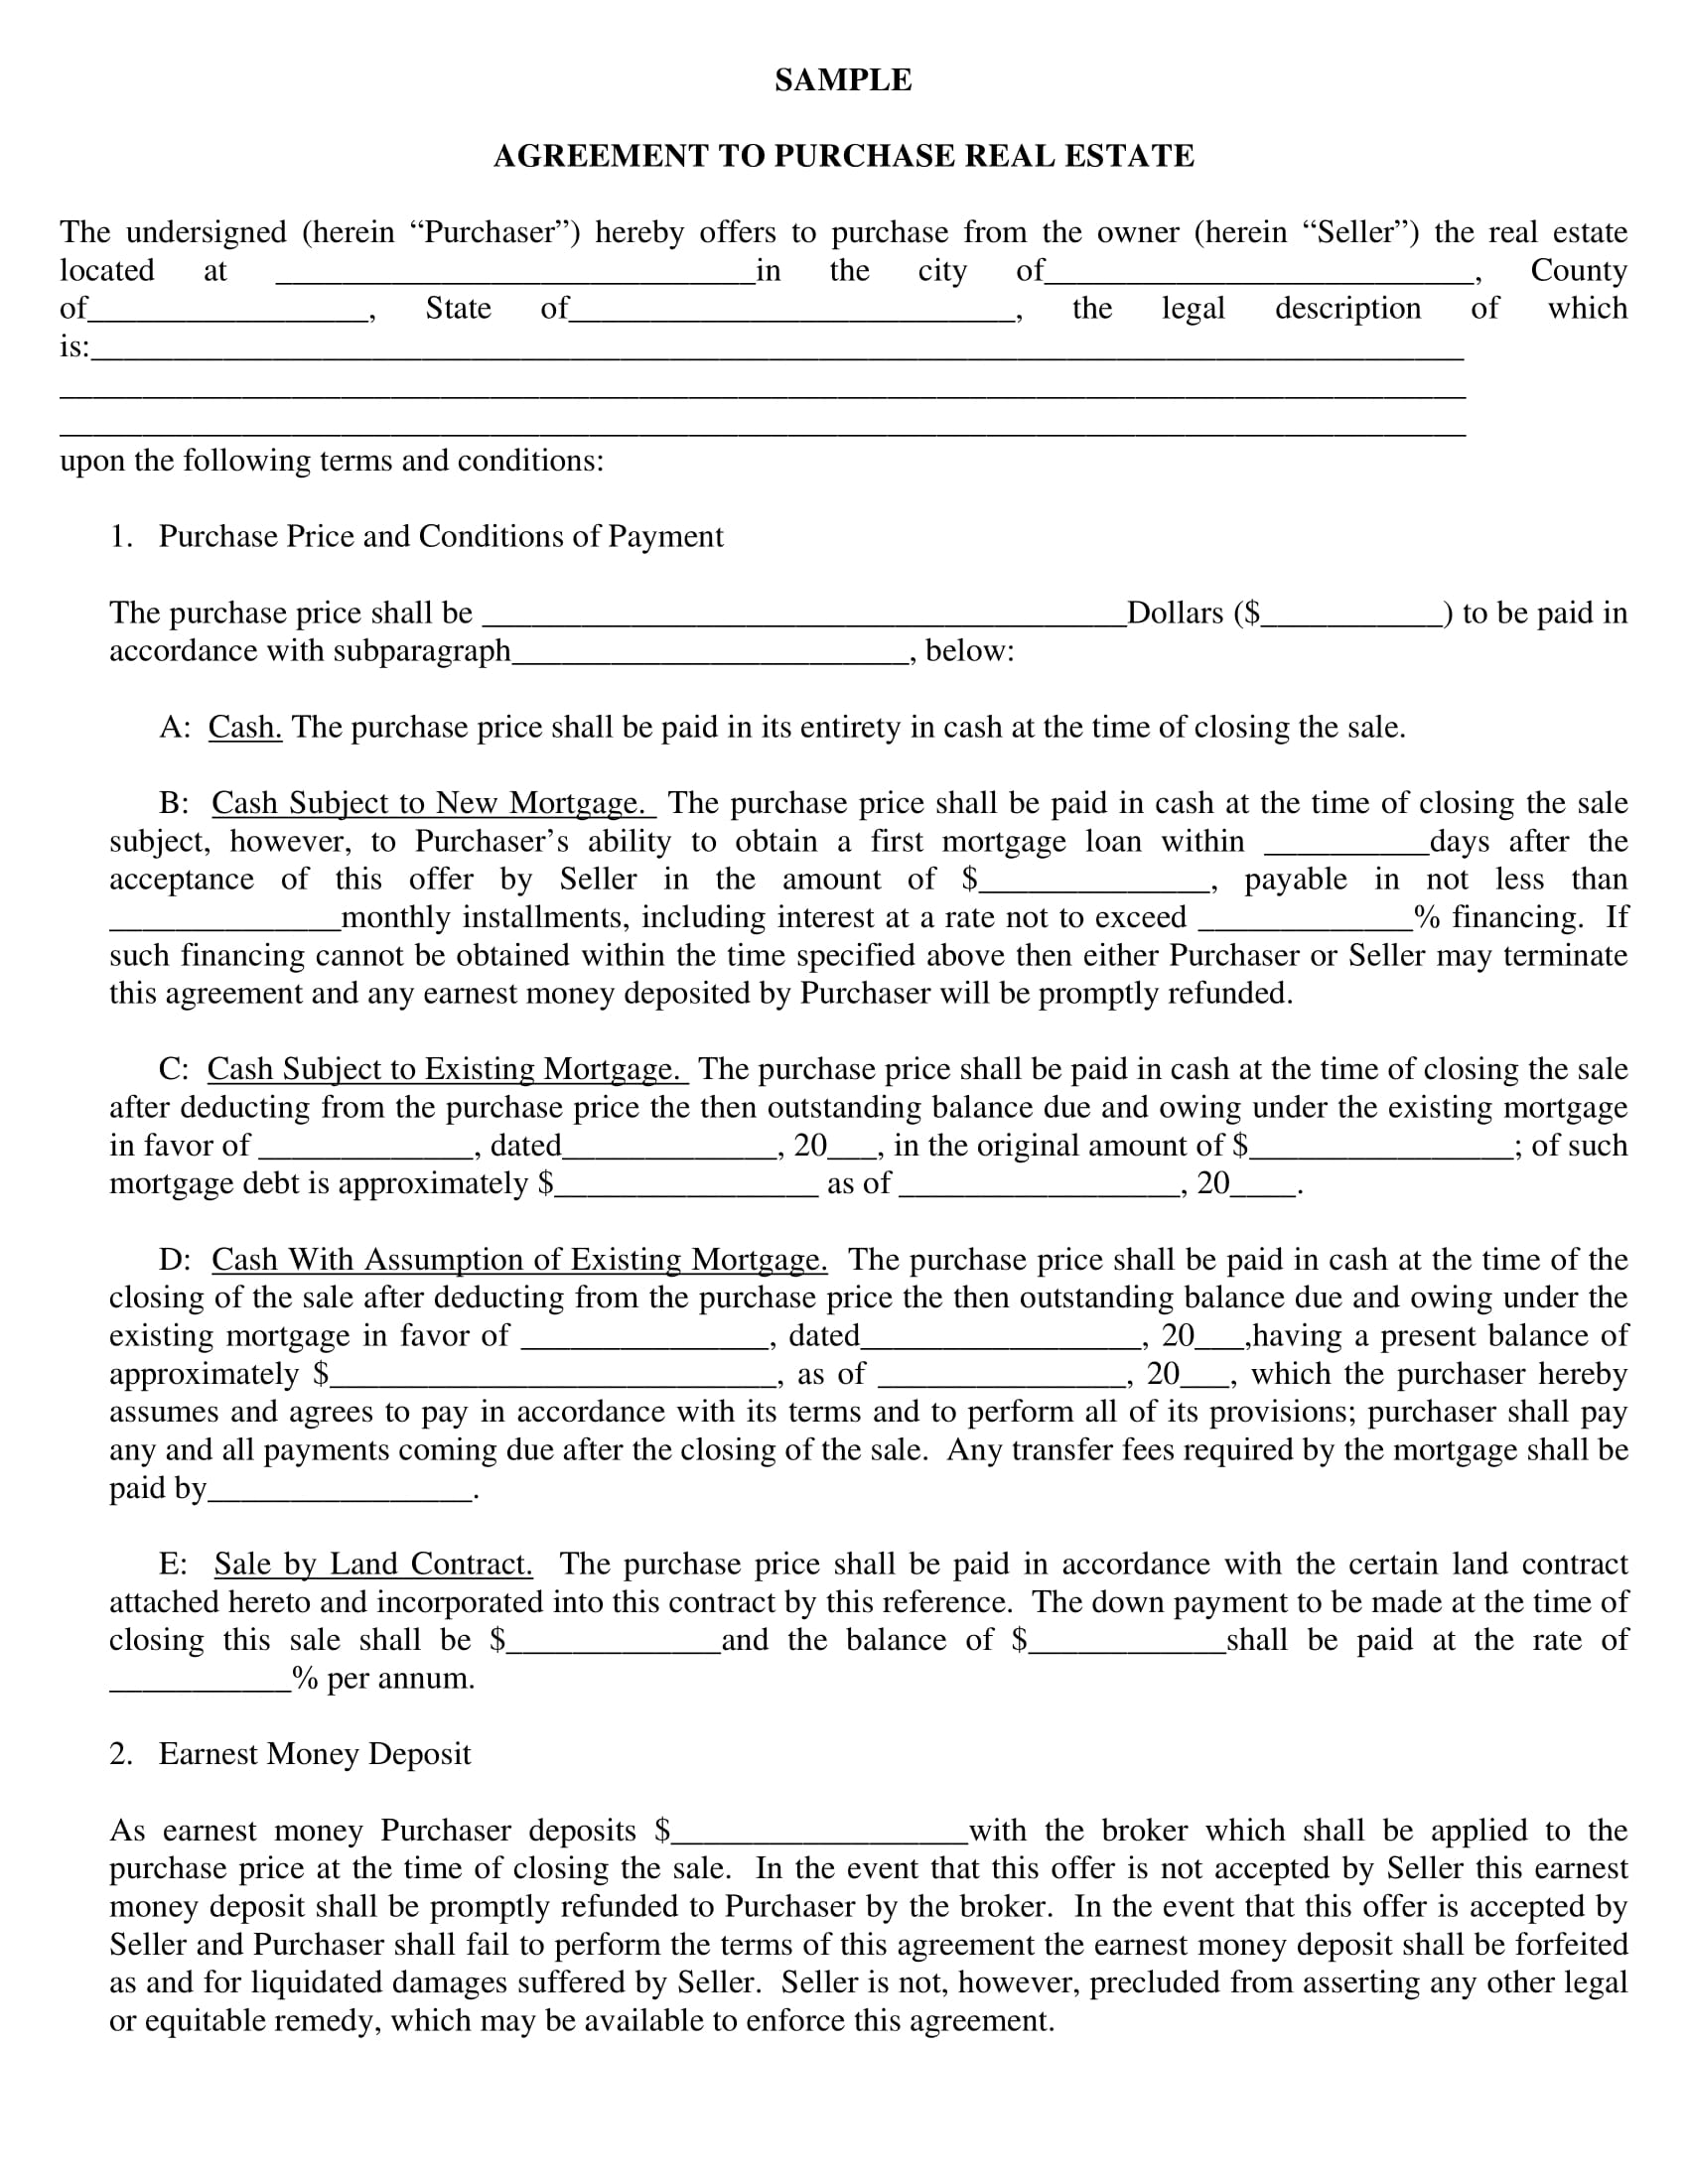 purchase-agreement-contract-form-18-examples-format-pdf-examples